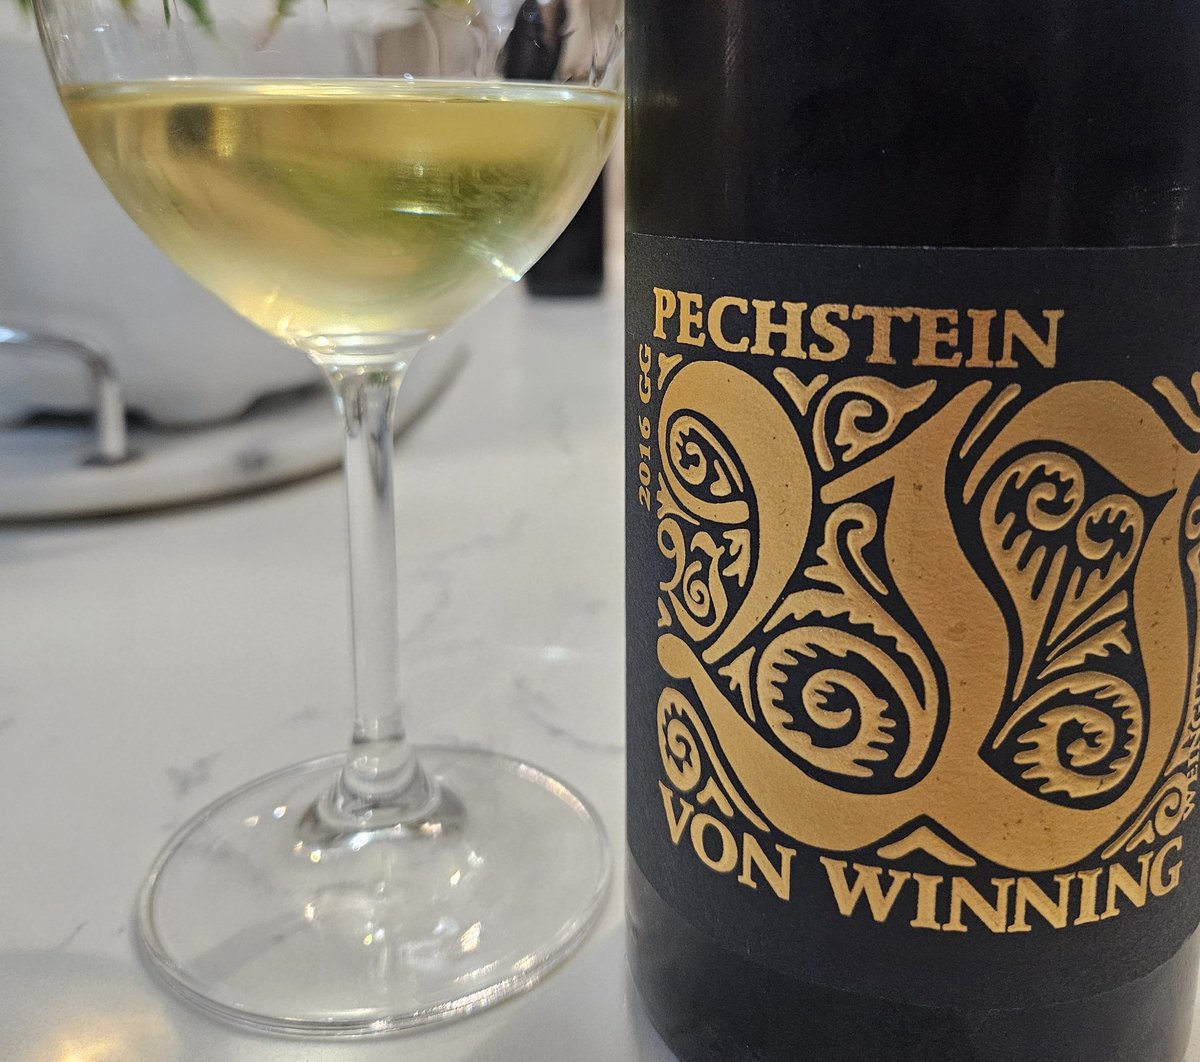 When visiting @DeWetshofWines one can be sure of also walking into a great German Riesling. Vivacious lemon-curd, cardamom, dried wild figs and slow-running gin-clear chalk-stream.